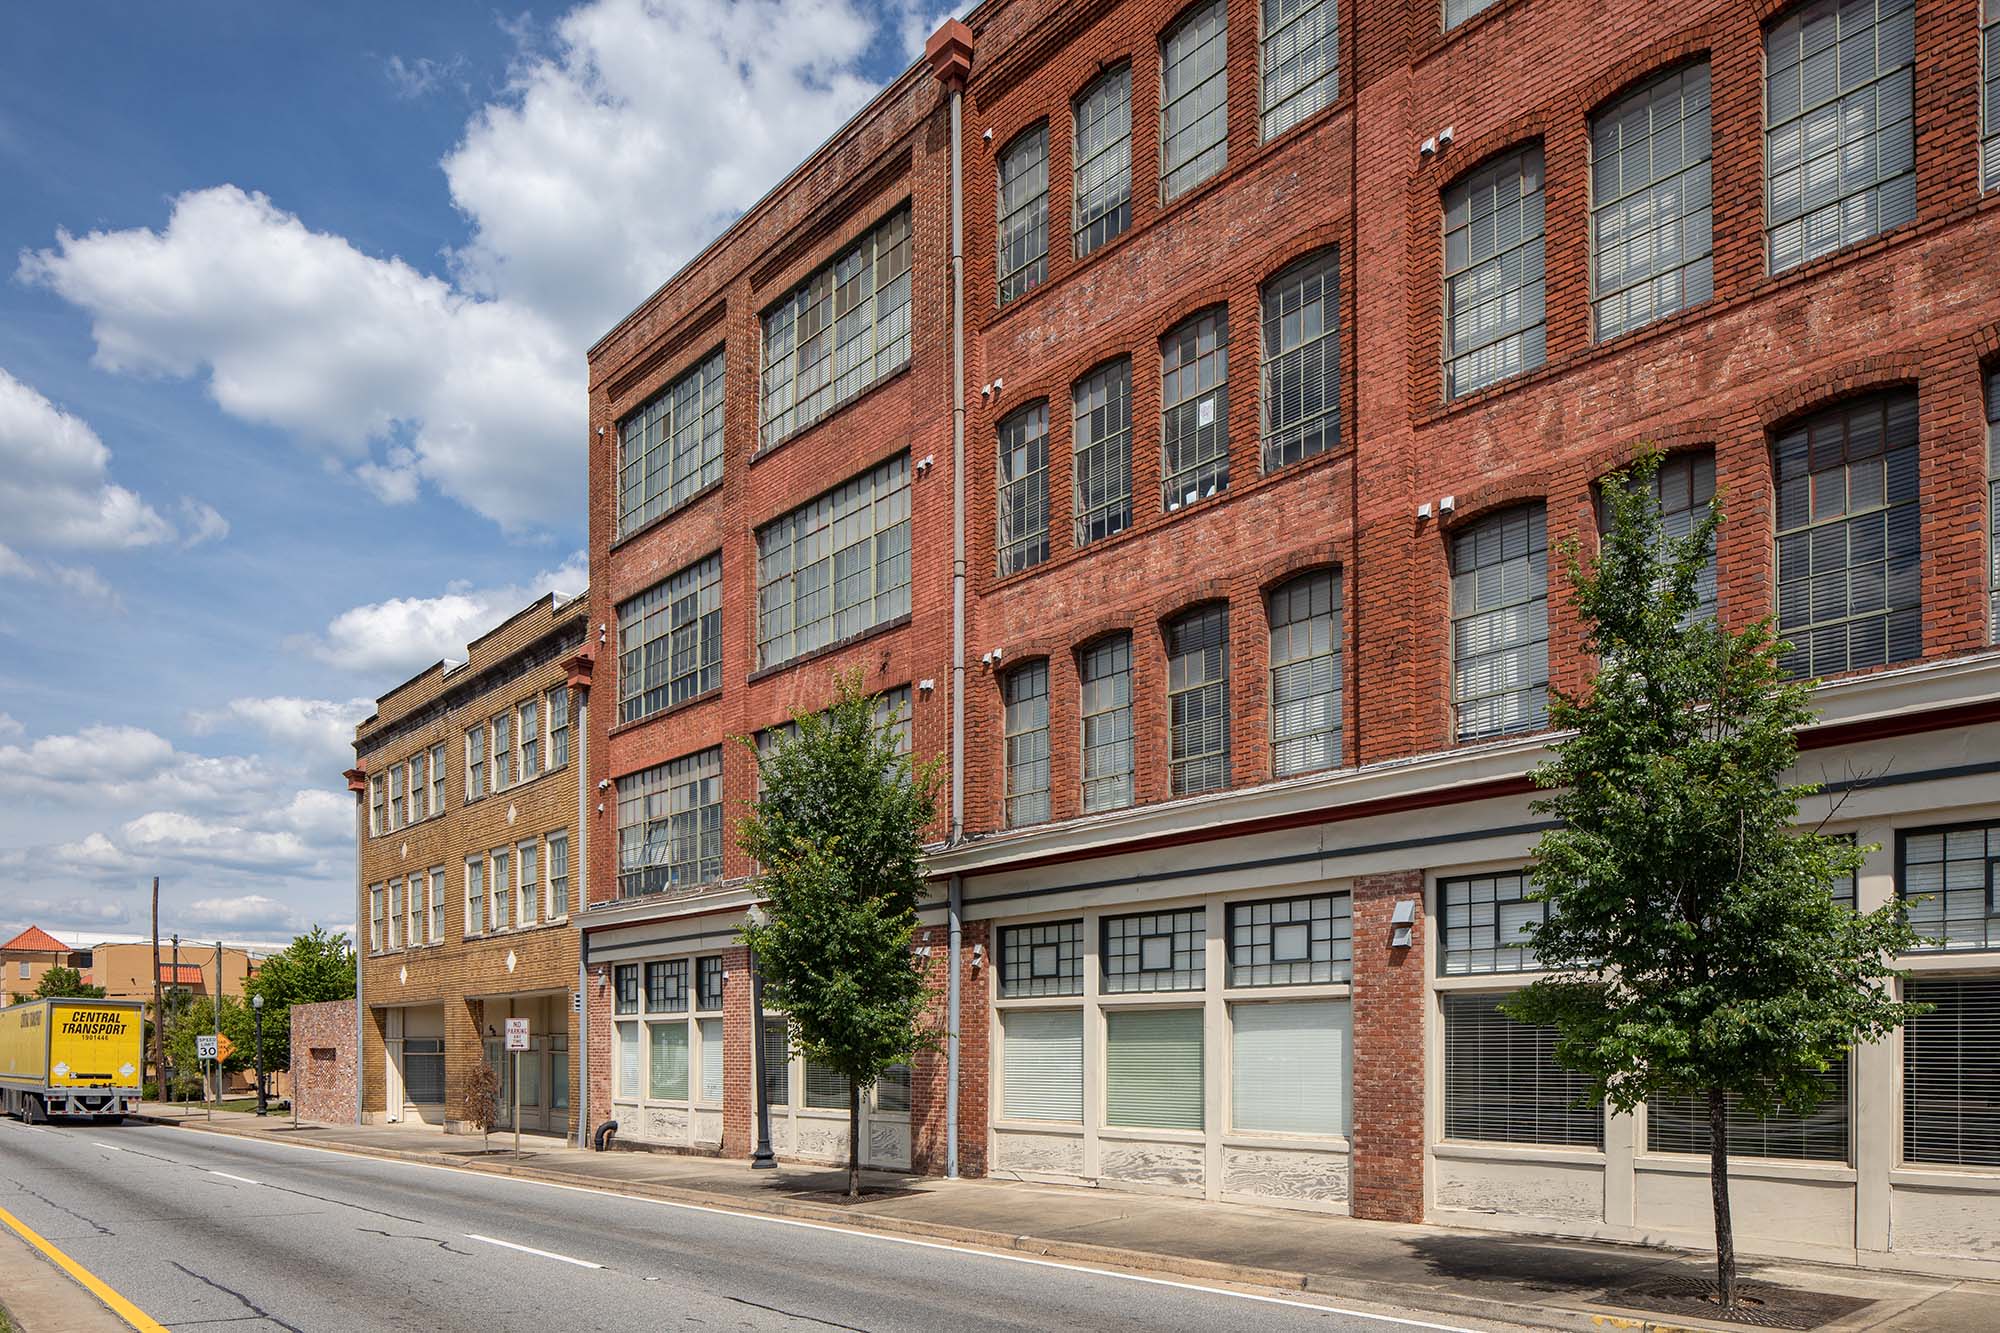 Our community's iconic brick exterior at Broadway Lofts in Macon, Georgia